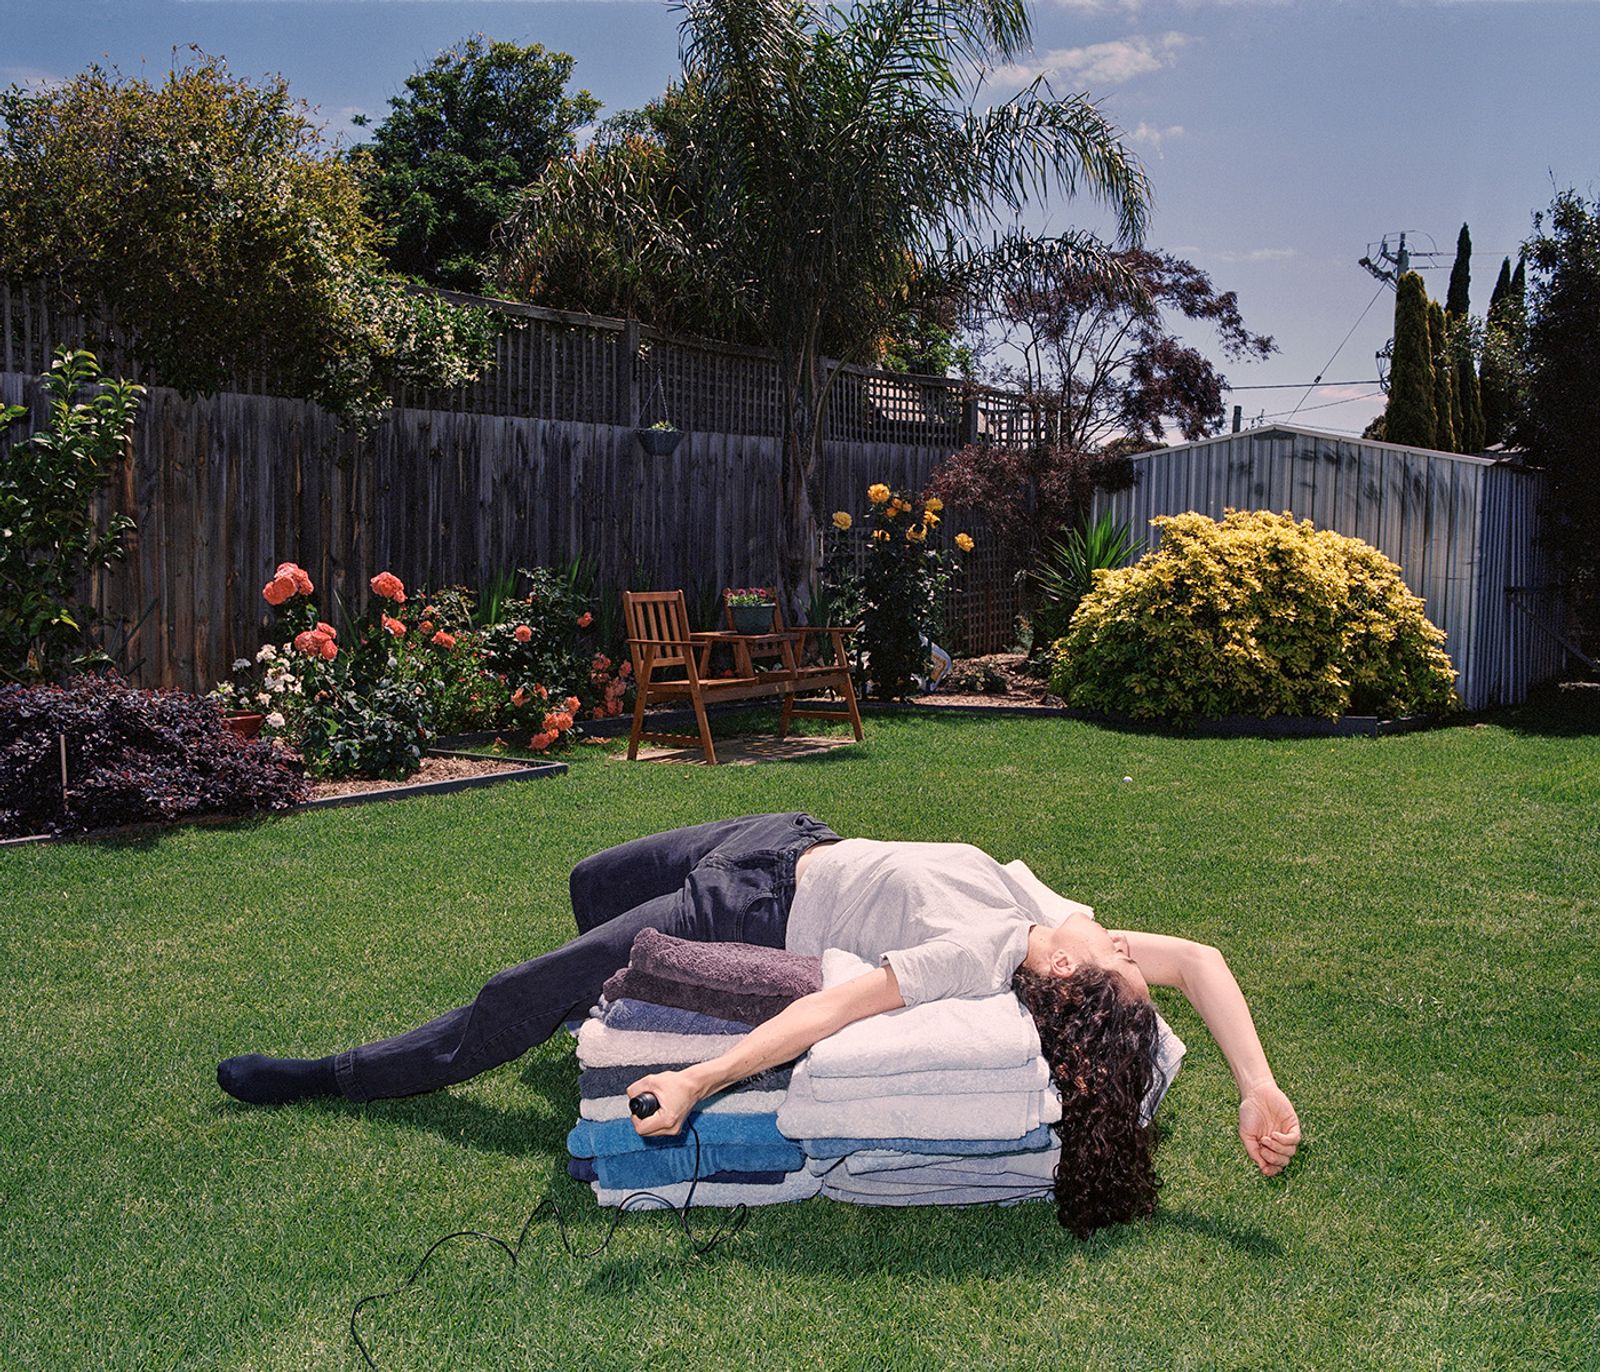 Using Performative Photography, Meg De Young Redefines The Relationships With Her Mother